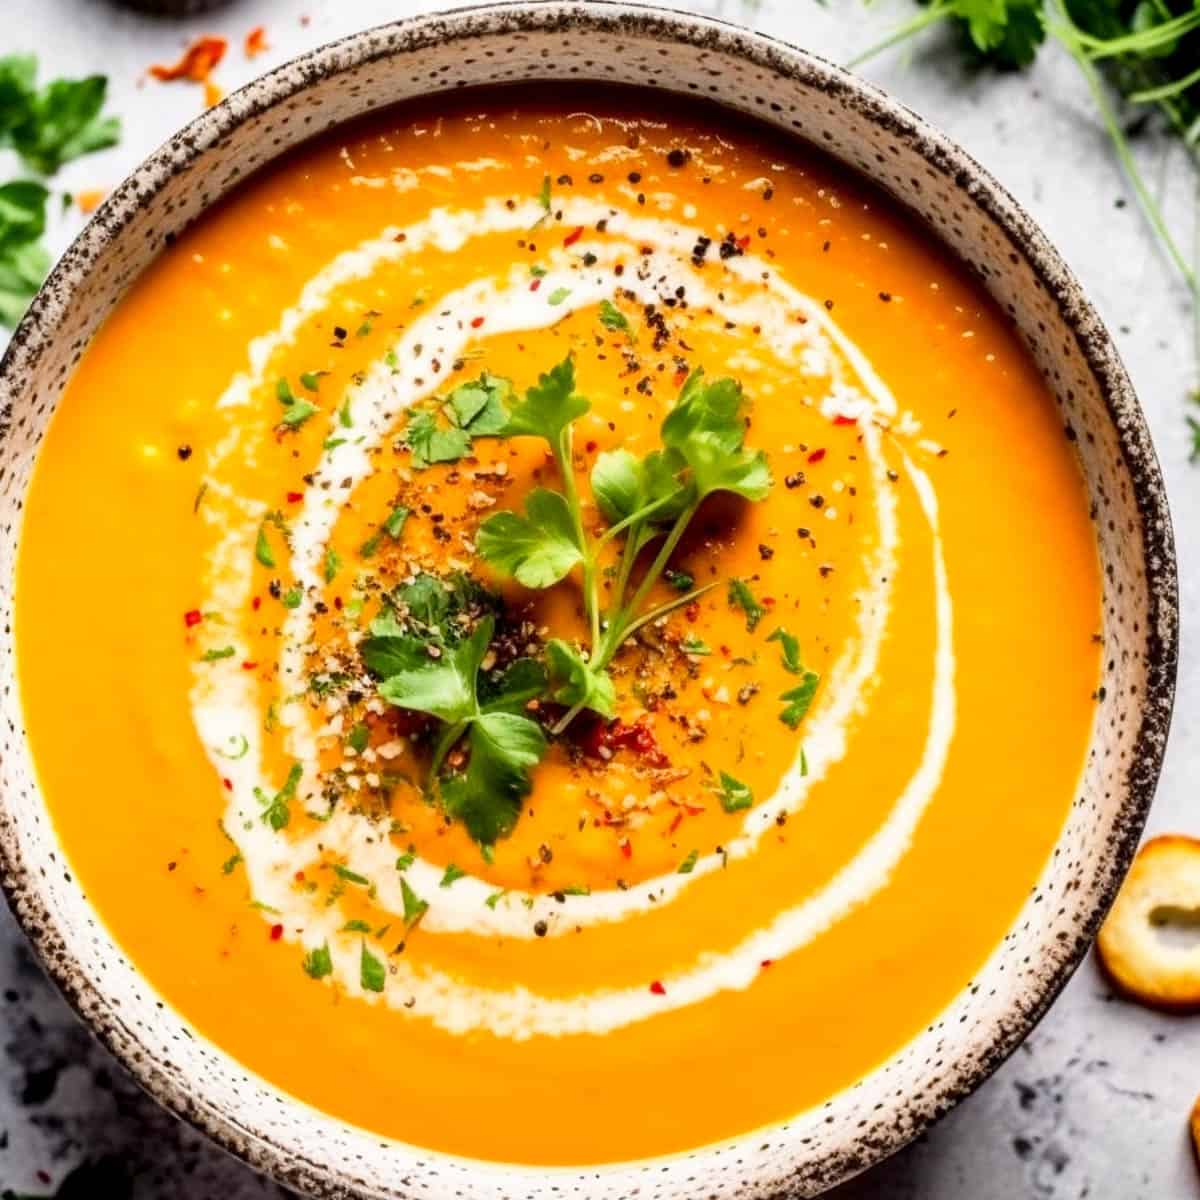 Carrot and coriander soup in a bowl.